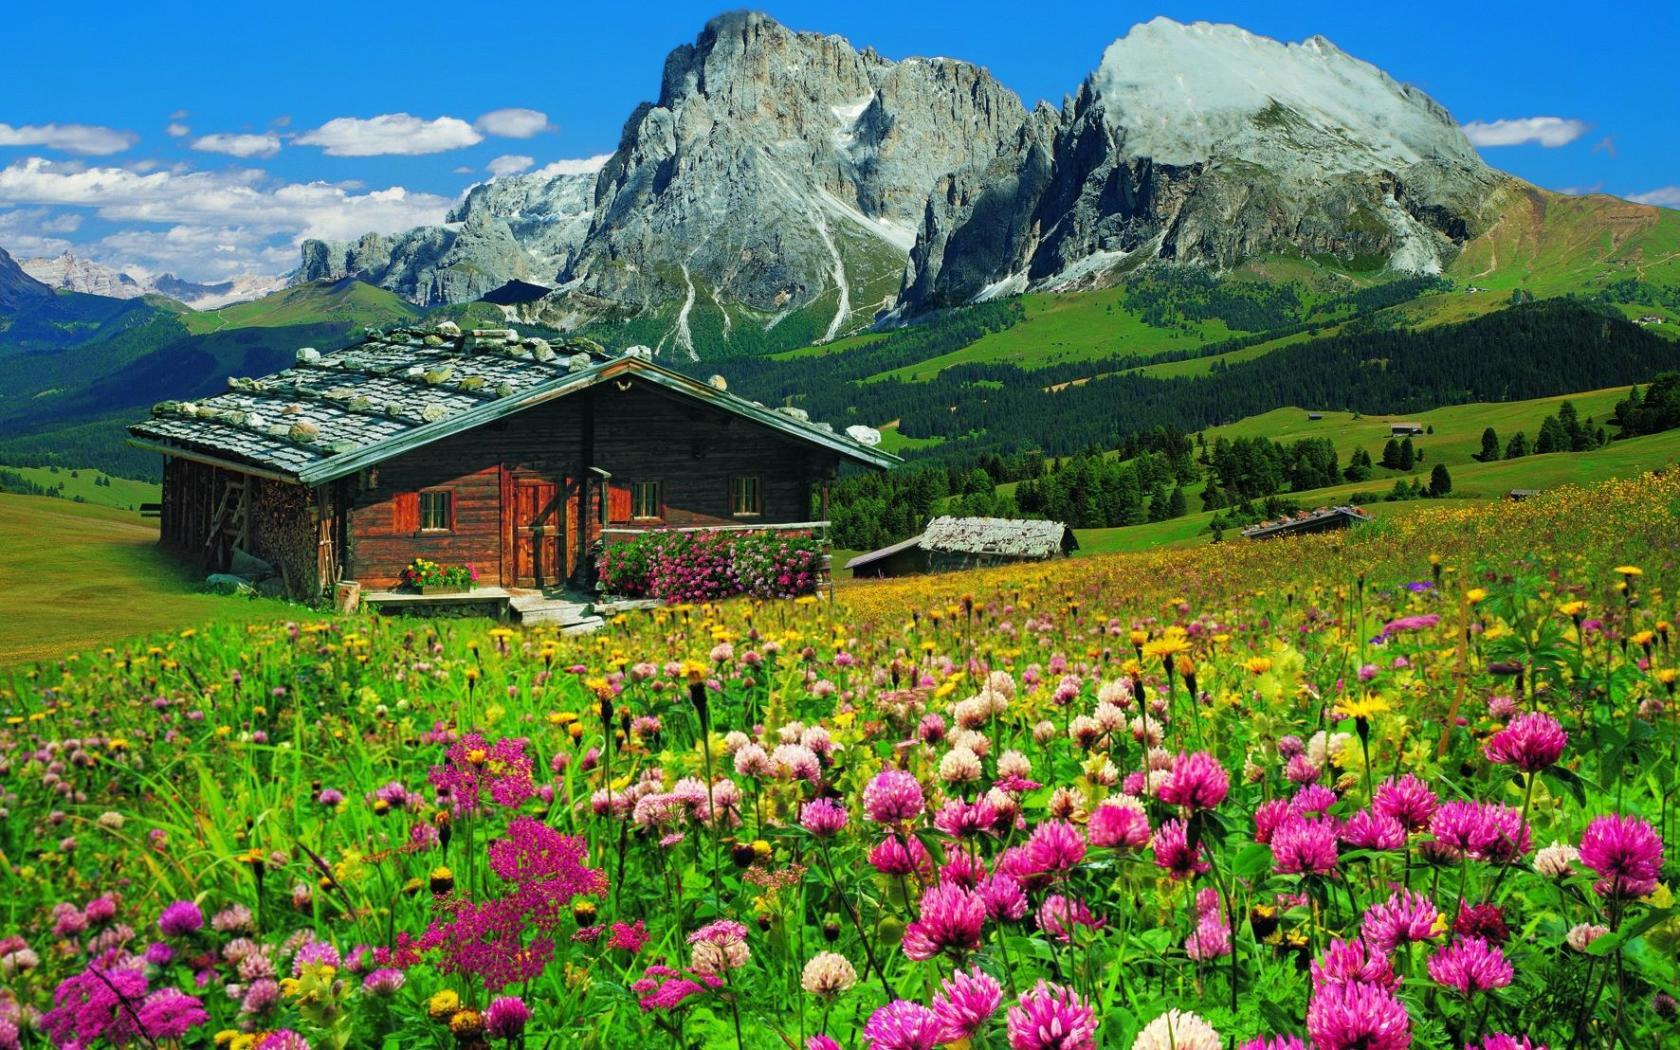 House and Wildflowers in the Mountains Wallpaper and Background